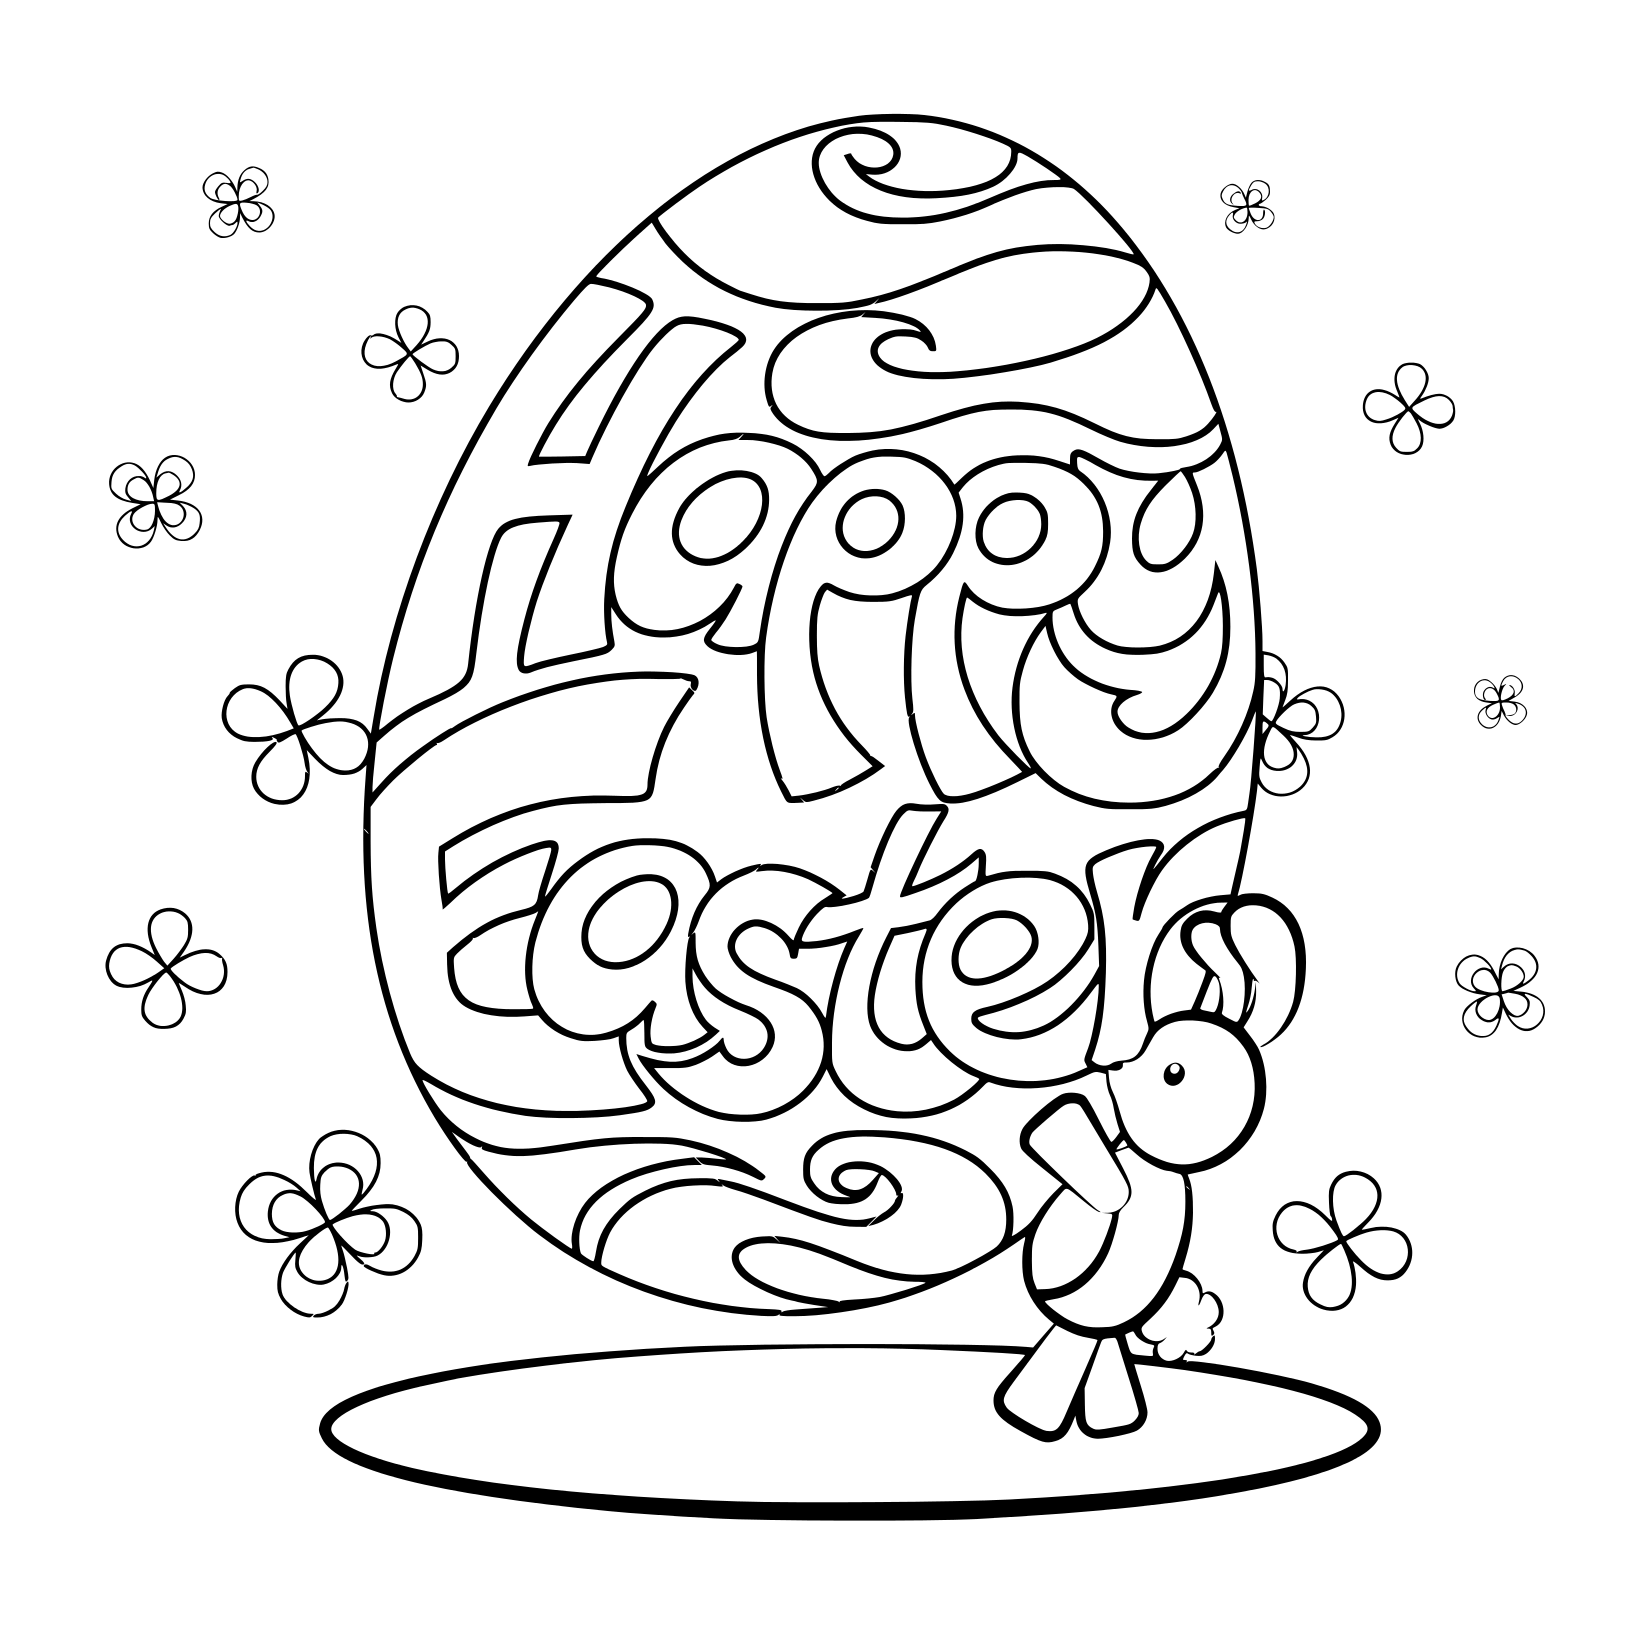 Happy Easter Rabbit Coloring Page